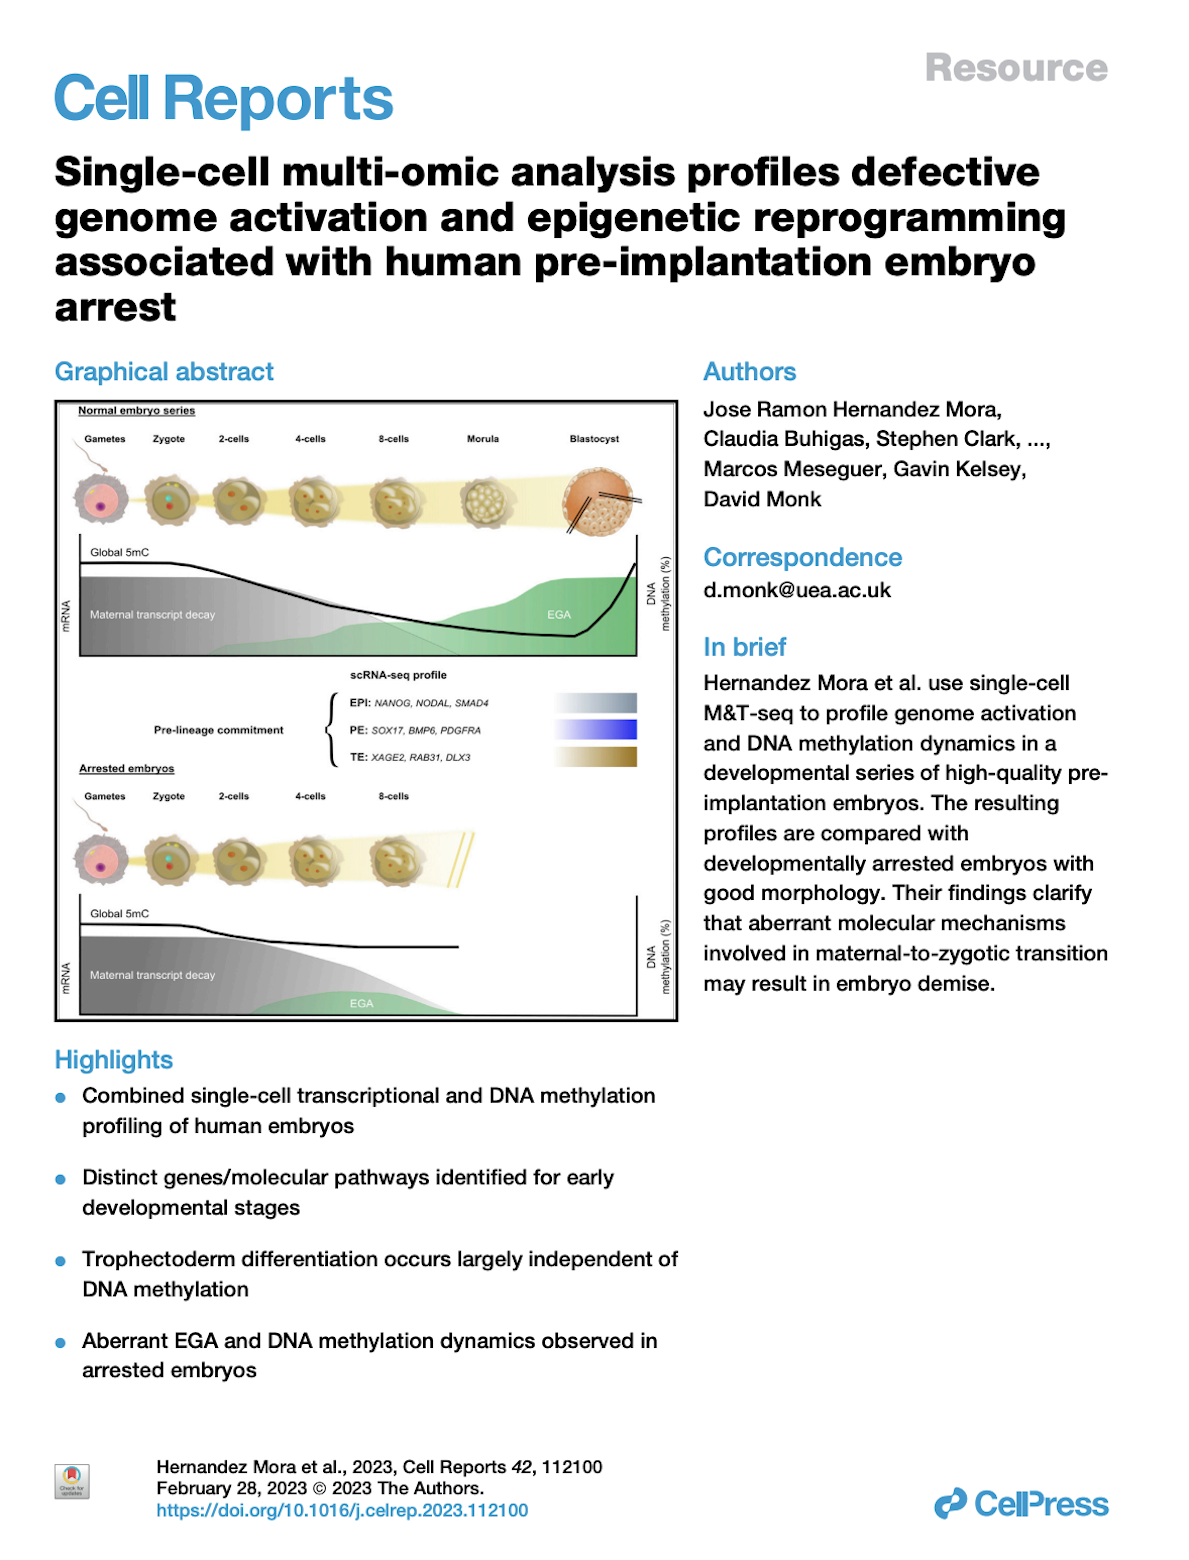 Hernandez-Mora, Jose Ramon, et al. 'Single-cell multi-omic analysis profiles defective genome activation and epigenetic reprogramming associated with human pre-implantation embryo arrest.' Cell Reports 42.2 (2023):1.